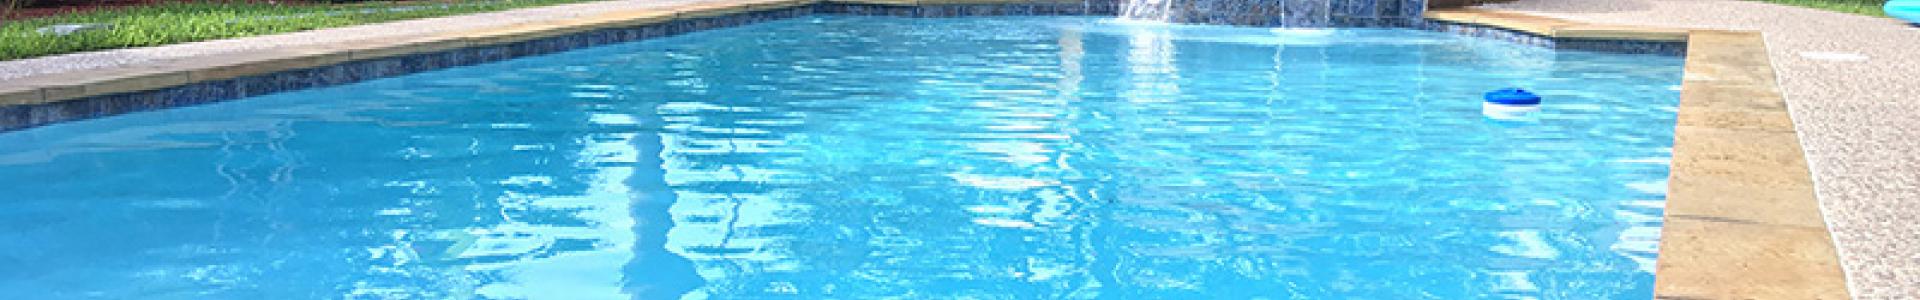 Maintaining Your Pool Before and After a Storm - The Pool Boys